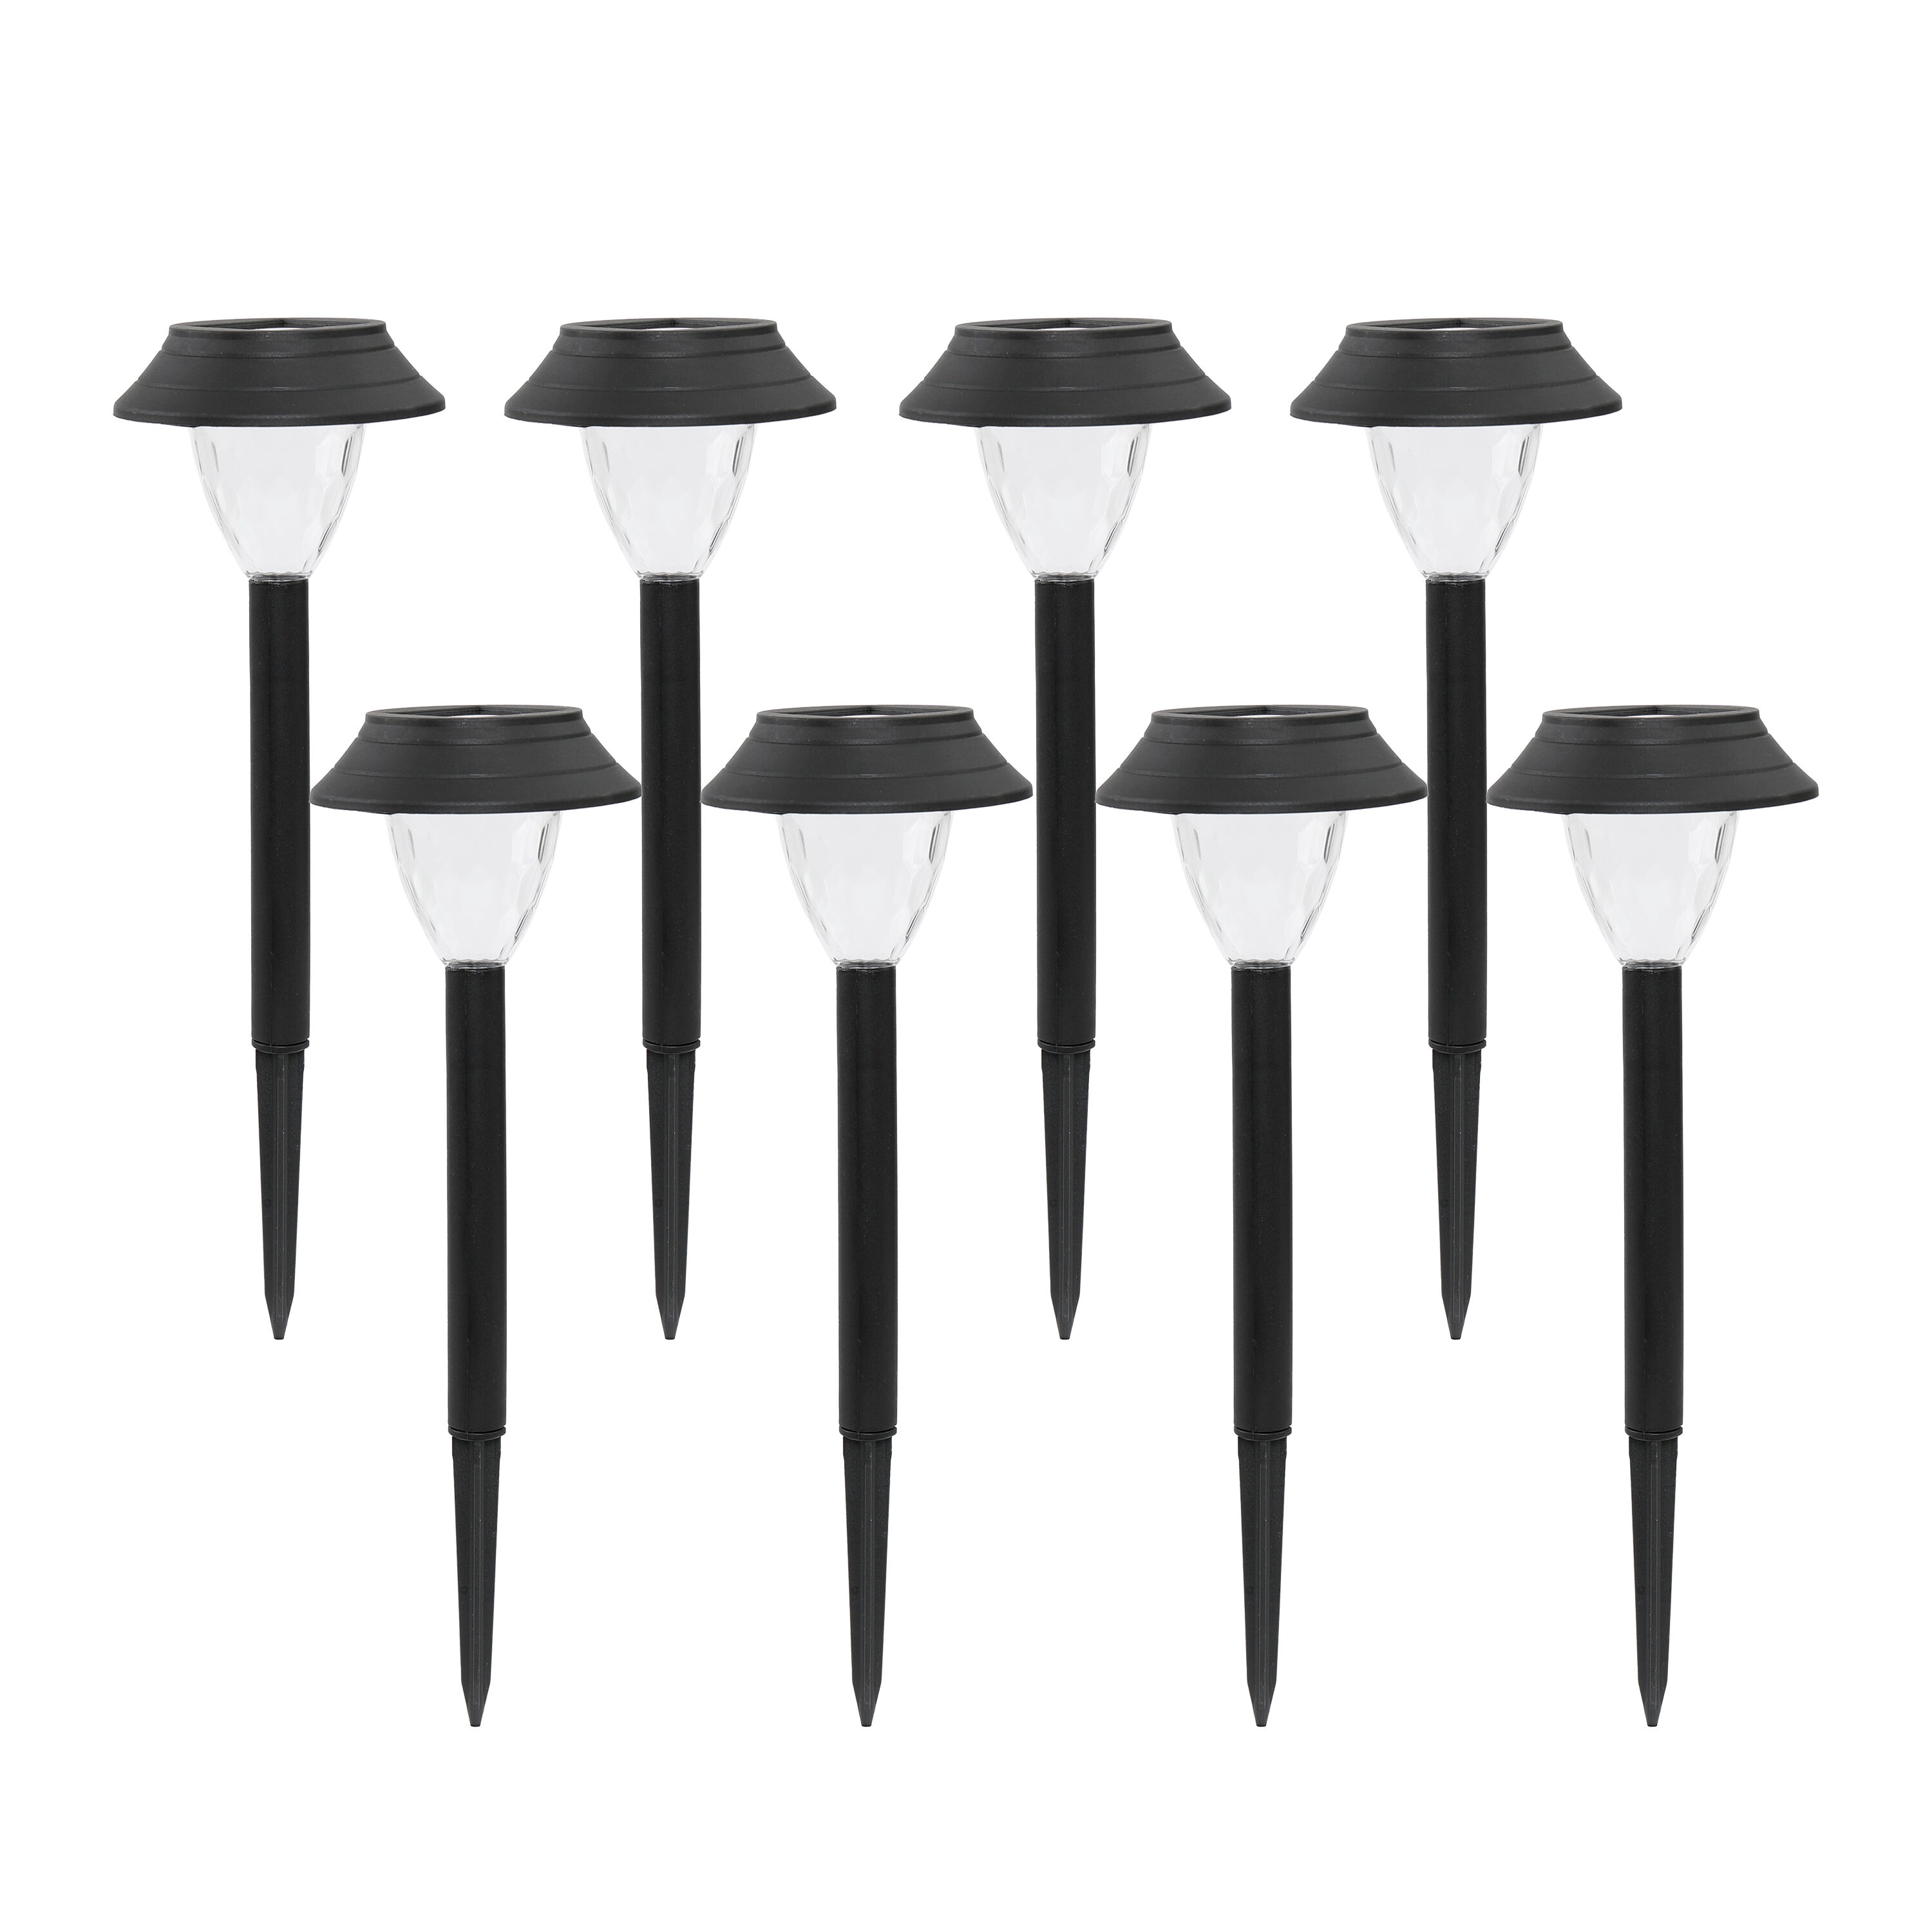 Lowes Stores: 10-Pack Westinghouse 3-Lumen Black Solar LED Outdoor Path Lights (3000K Temp.) $19.03 + Free Store Pick Up